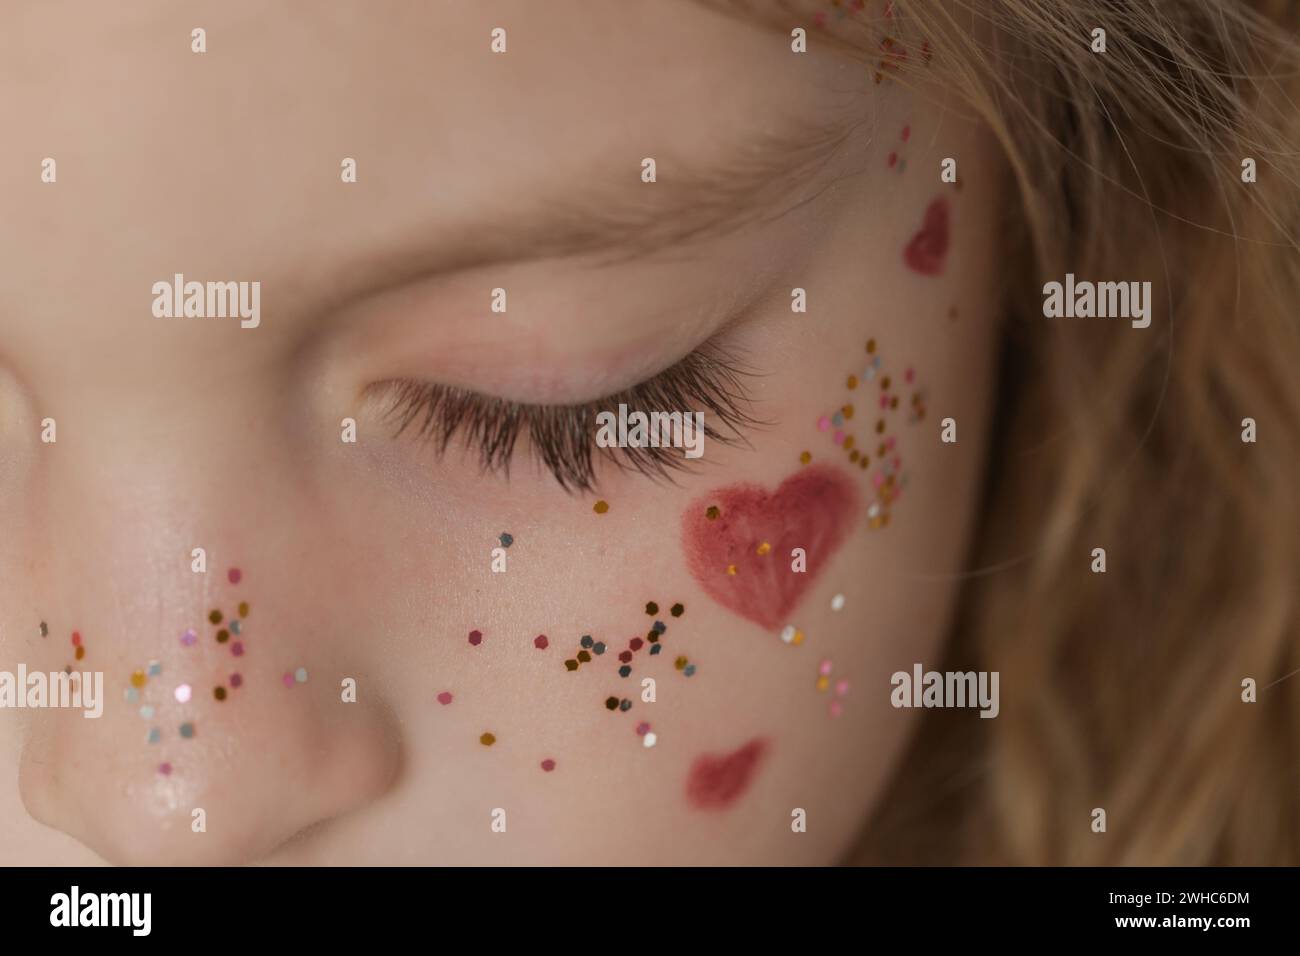 Close up of girl's closed eye with long lashes and glitters around Stock Photo